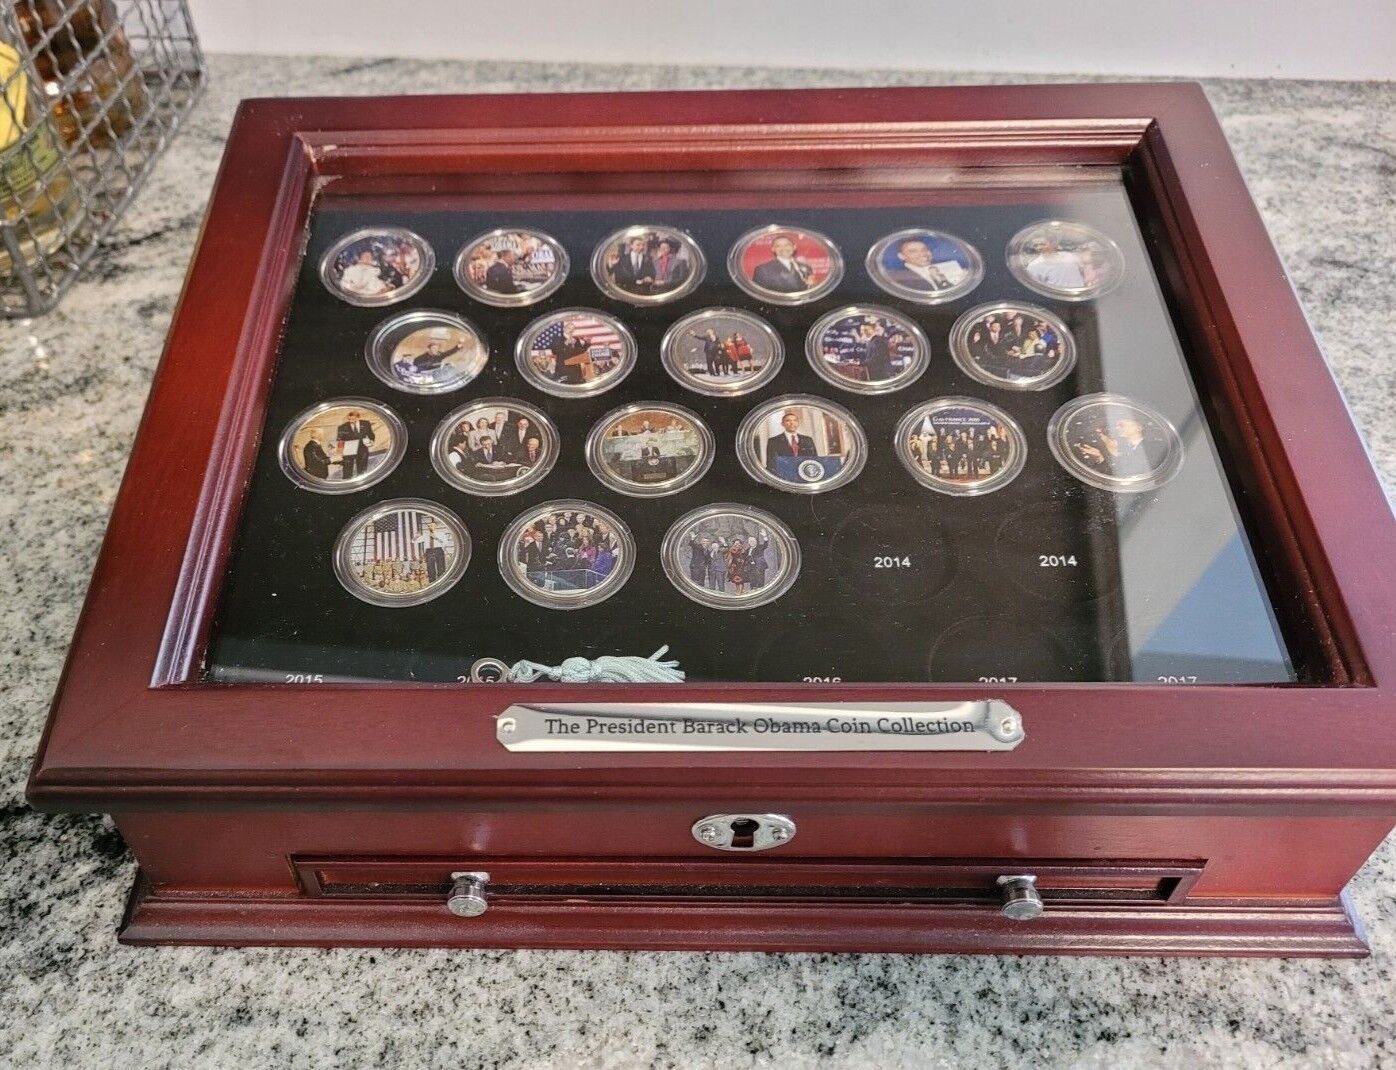 President Barack Obama Coin Collection Display Case with key Kennedy 50 cent pcs